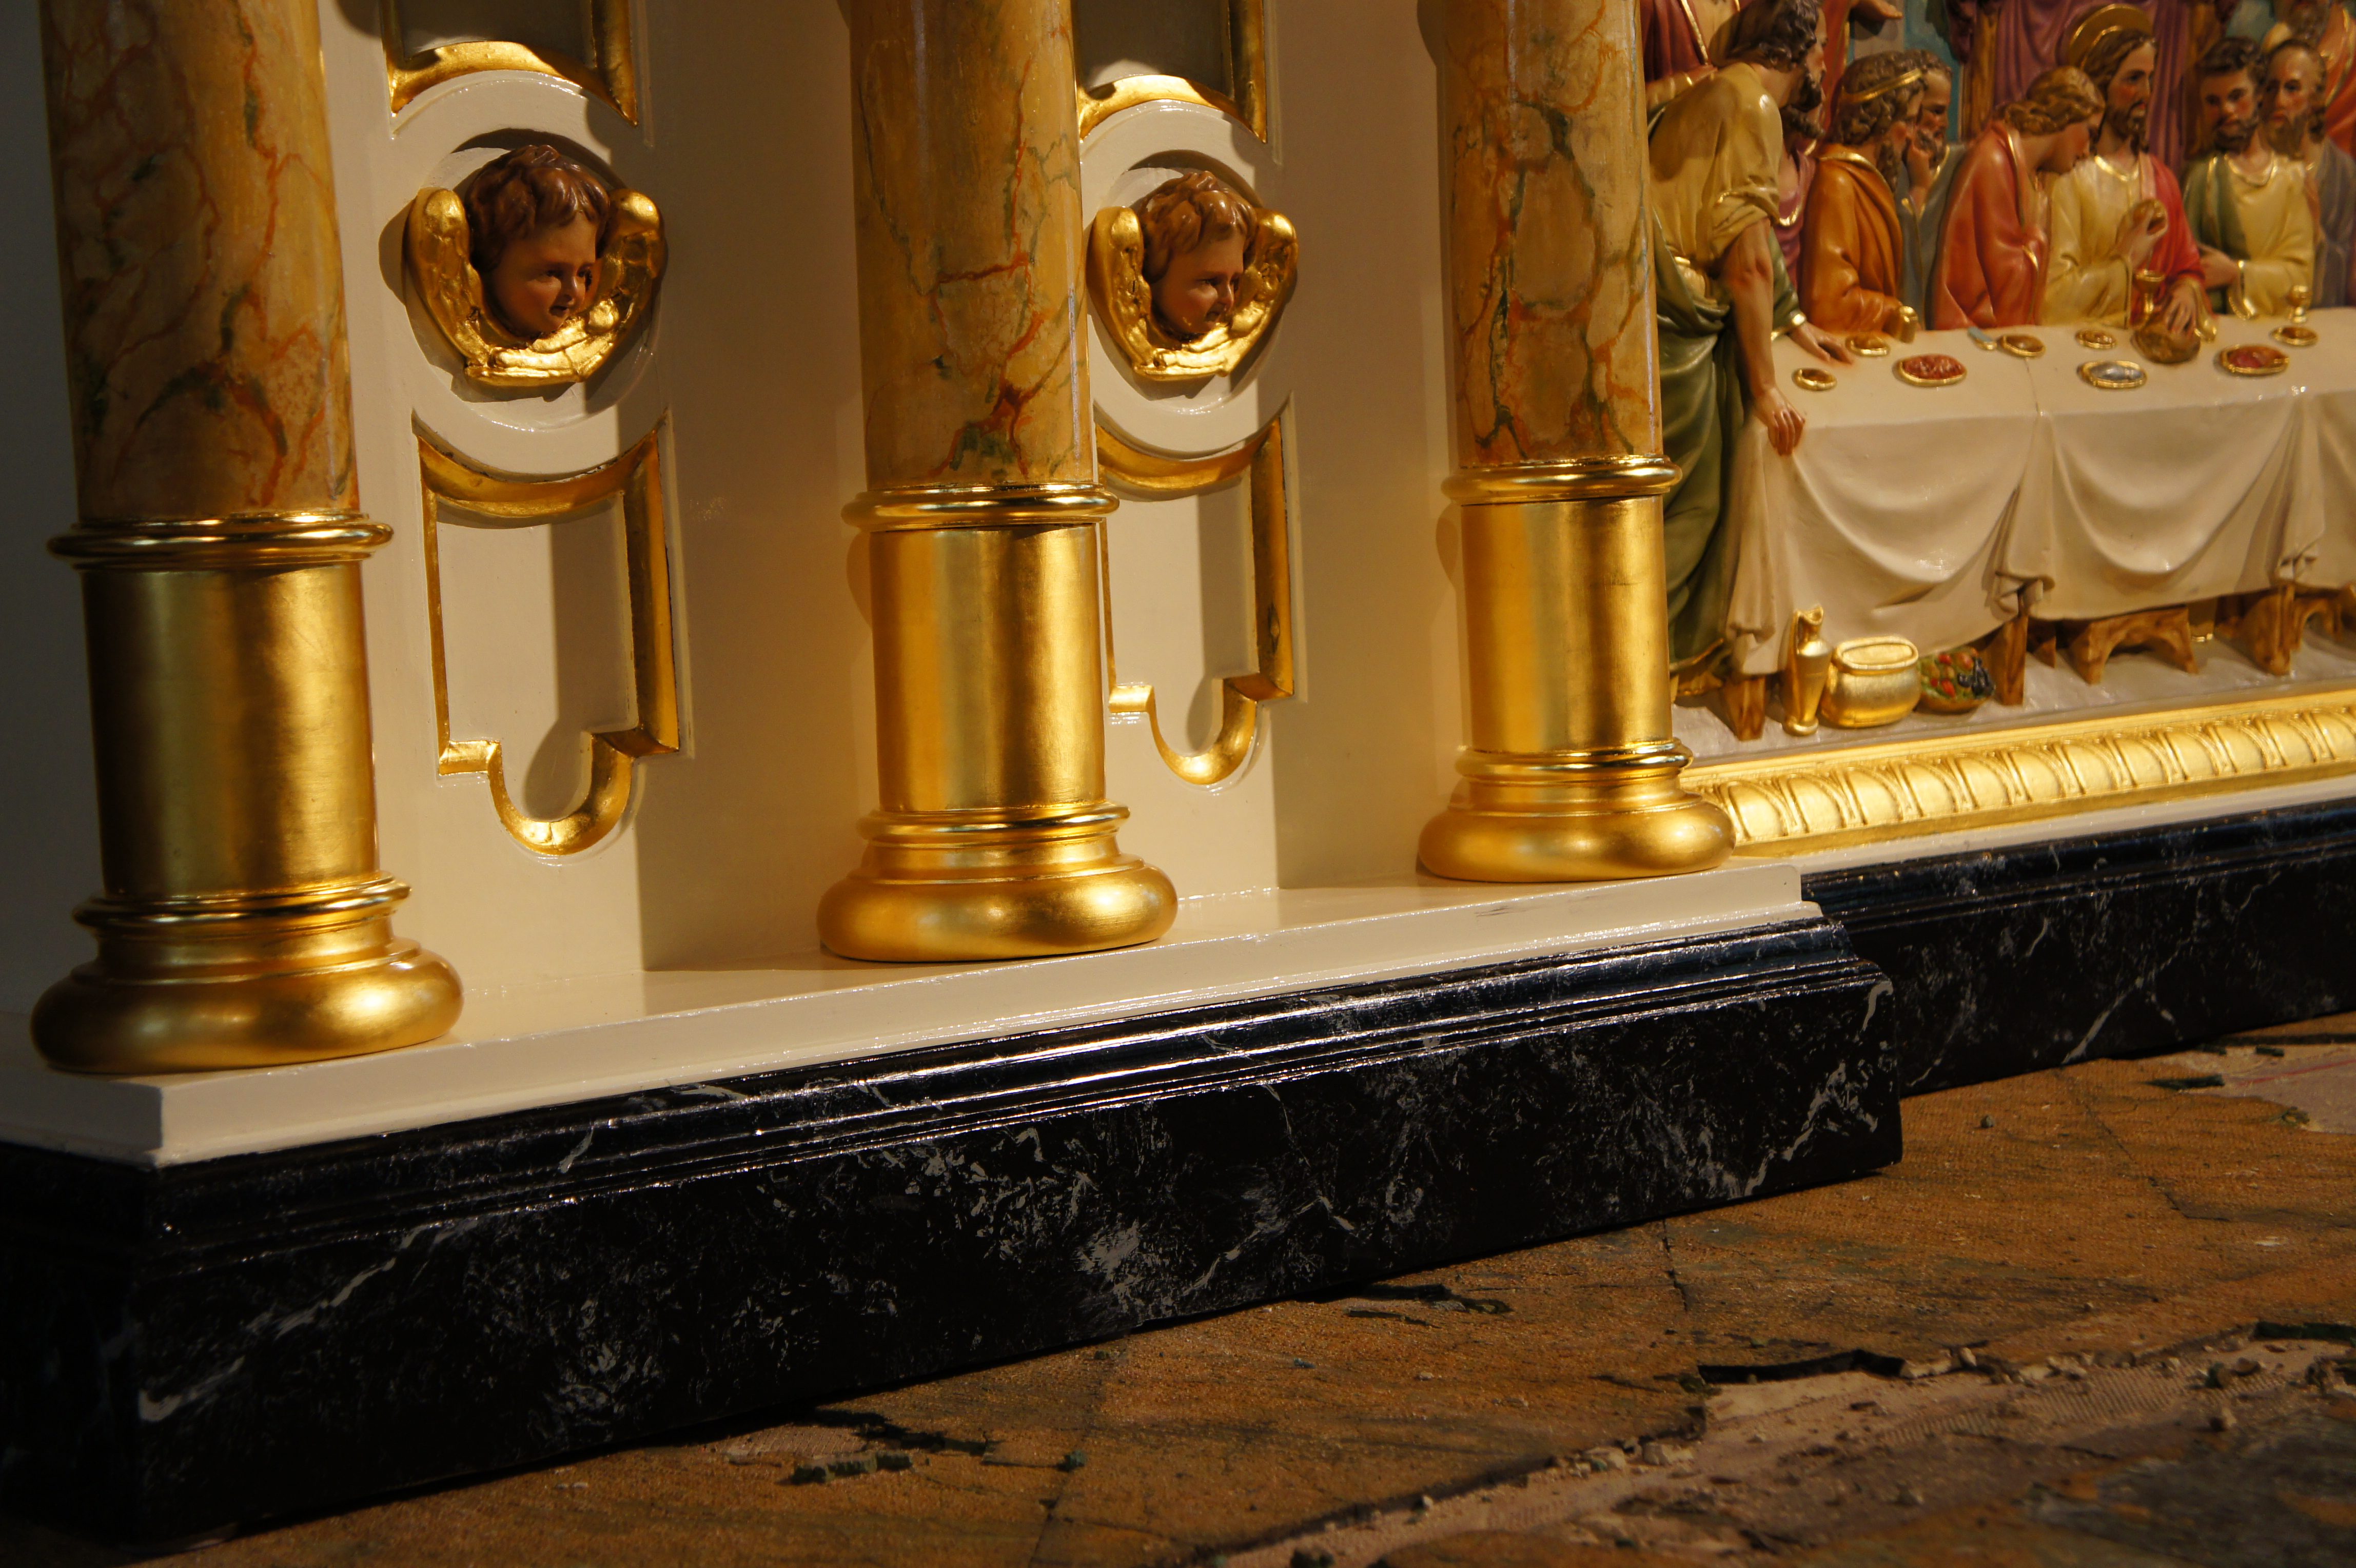 Tabernacle after gilding conservation and marble imitation